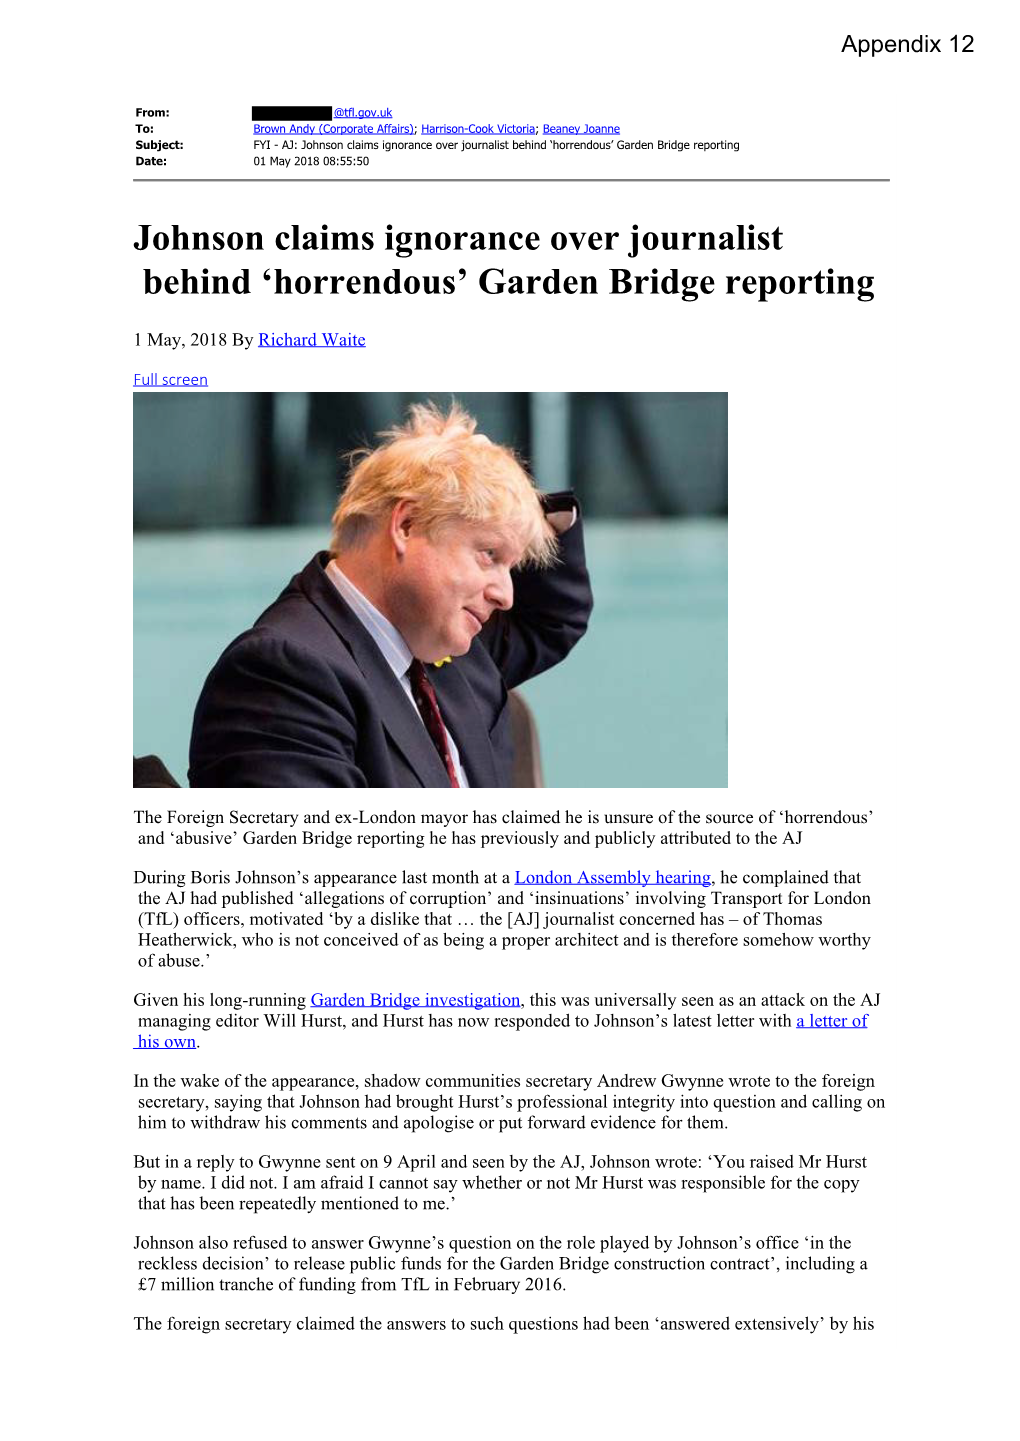 Johnson Claims Ignorance Over Journalist Behind 'Horrendous